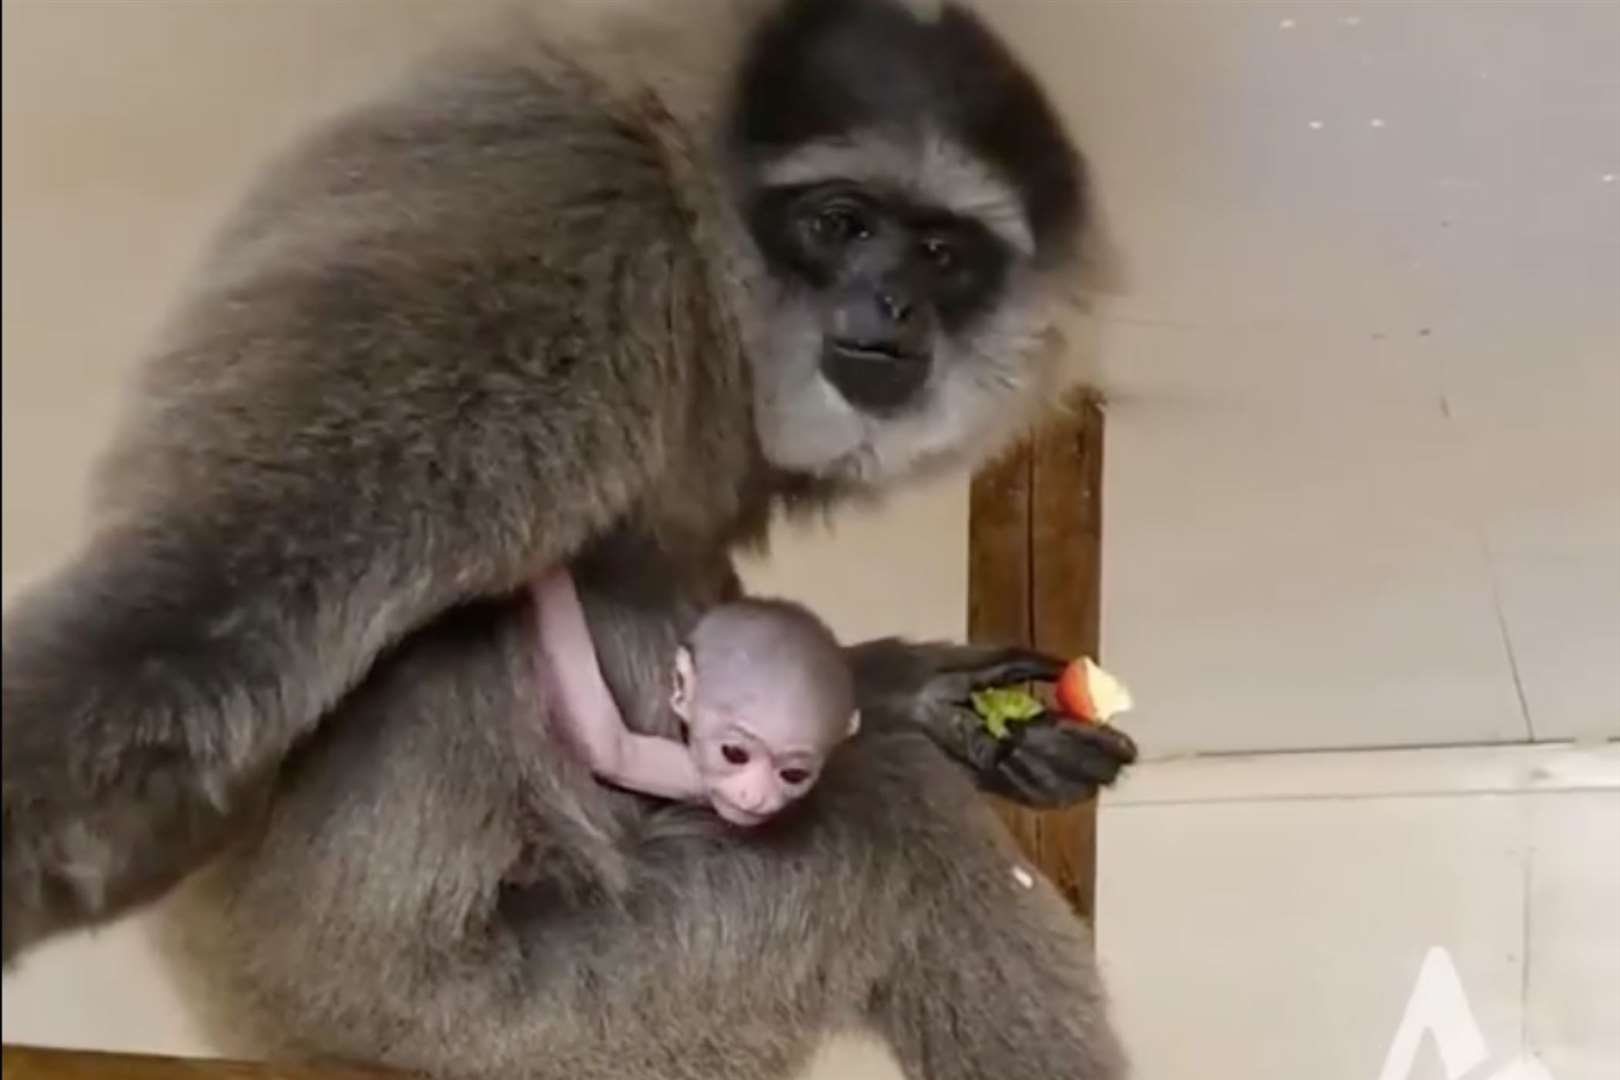 Tiga the baby gibbon was born earlier this year. Photo: Port Lympne